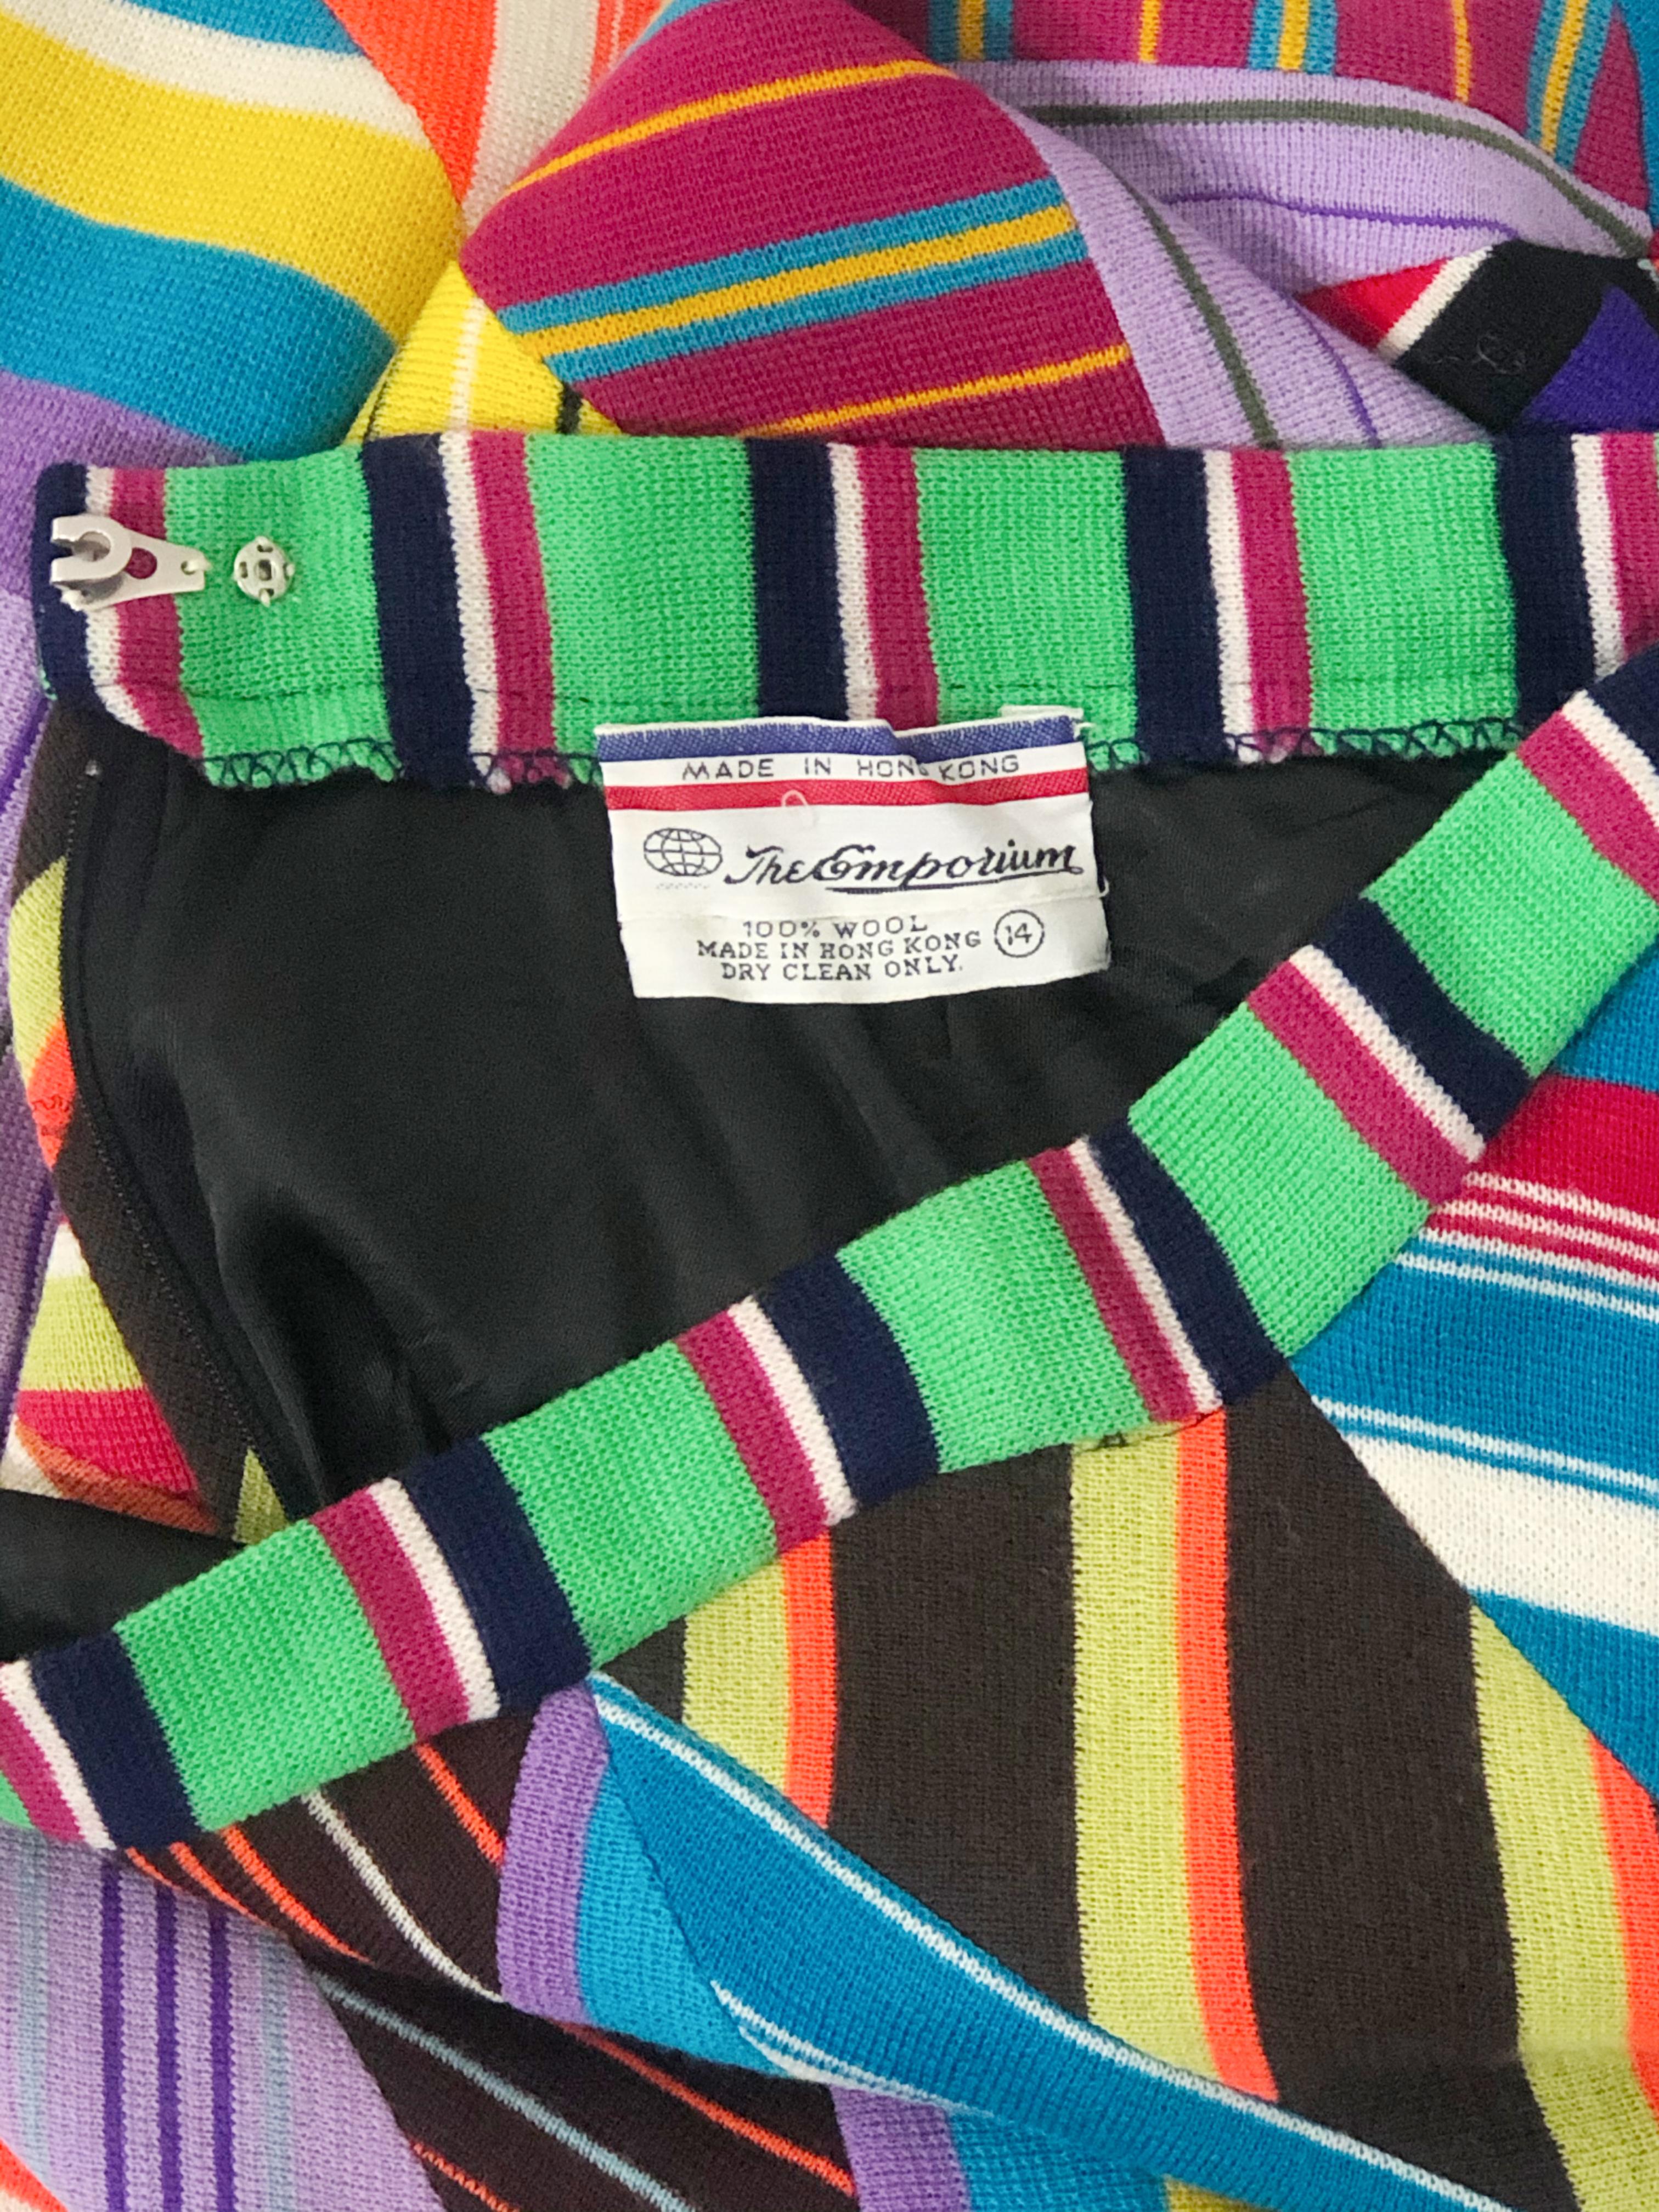 1970 The Emporium Fine Wool Knit Patchwork Modernist Maxi Skirt In Excellent Condition For Sale In Gresham, OR